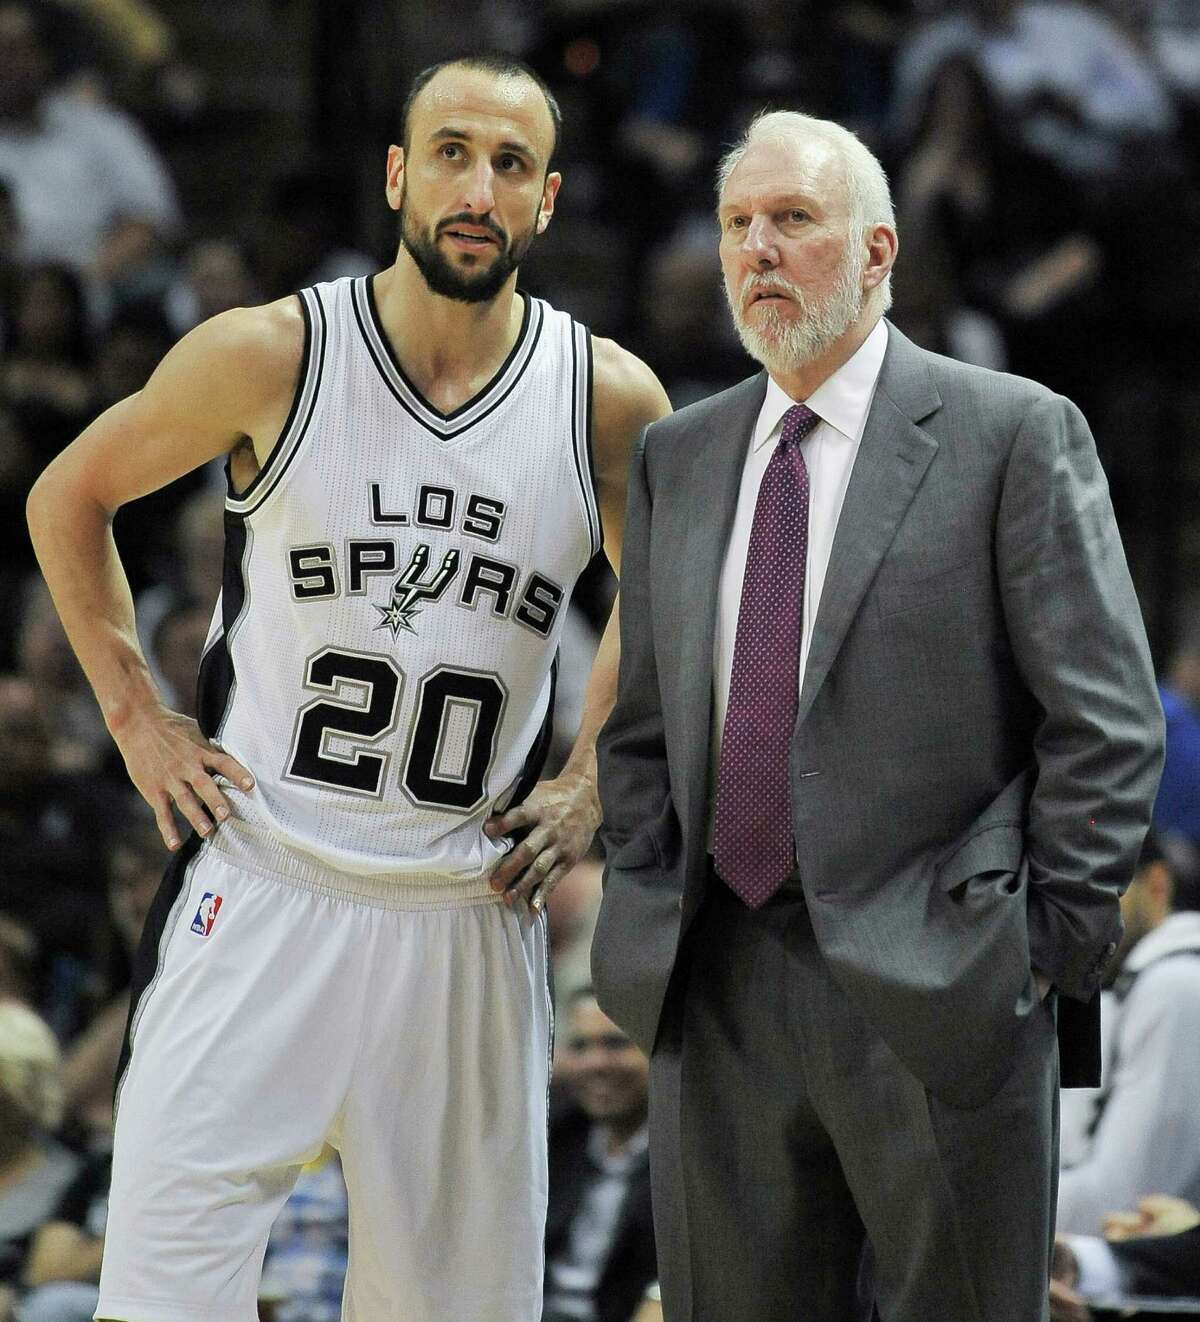 San Antonio Spurs coach Gregg Popovich, right, talks with guard Manu Ginobili, of Argentina, during the second half against the Denver Nuggets on April 3, 2015, in San Antonio.